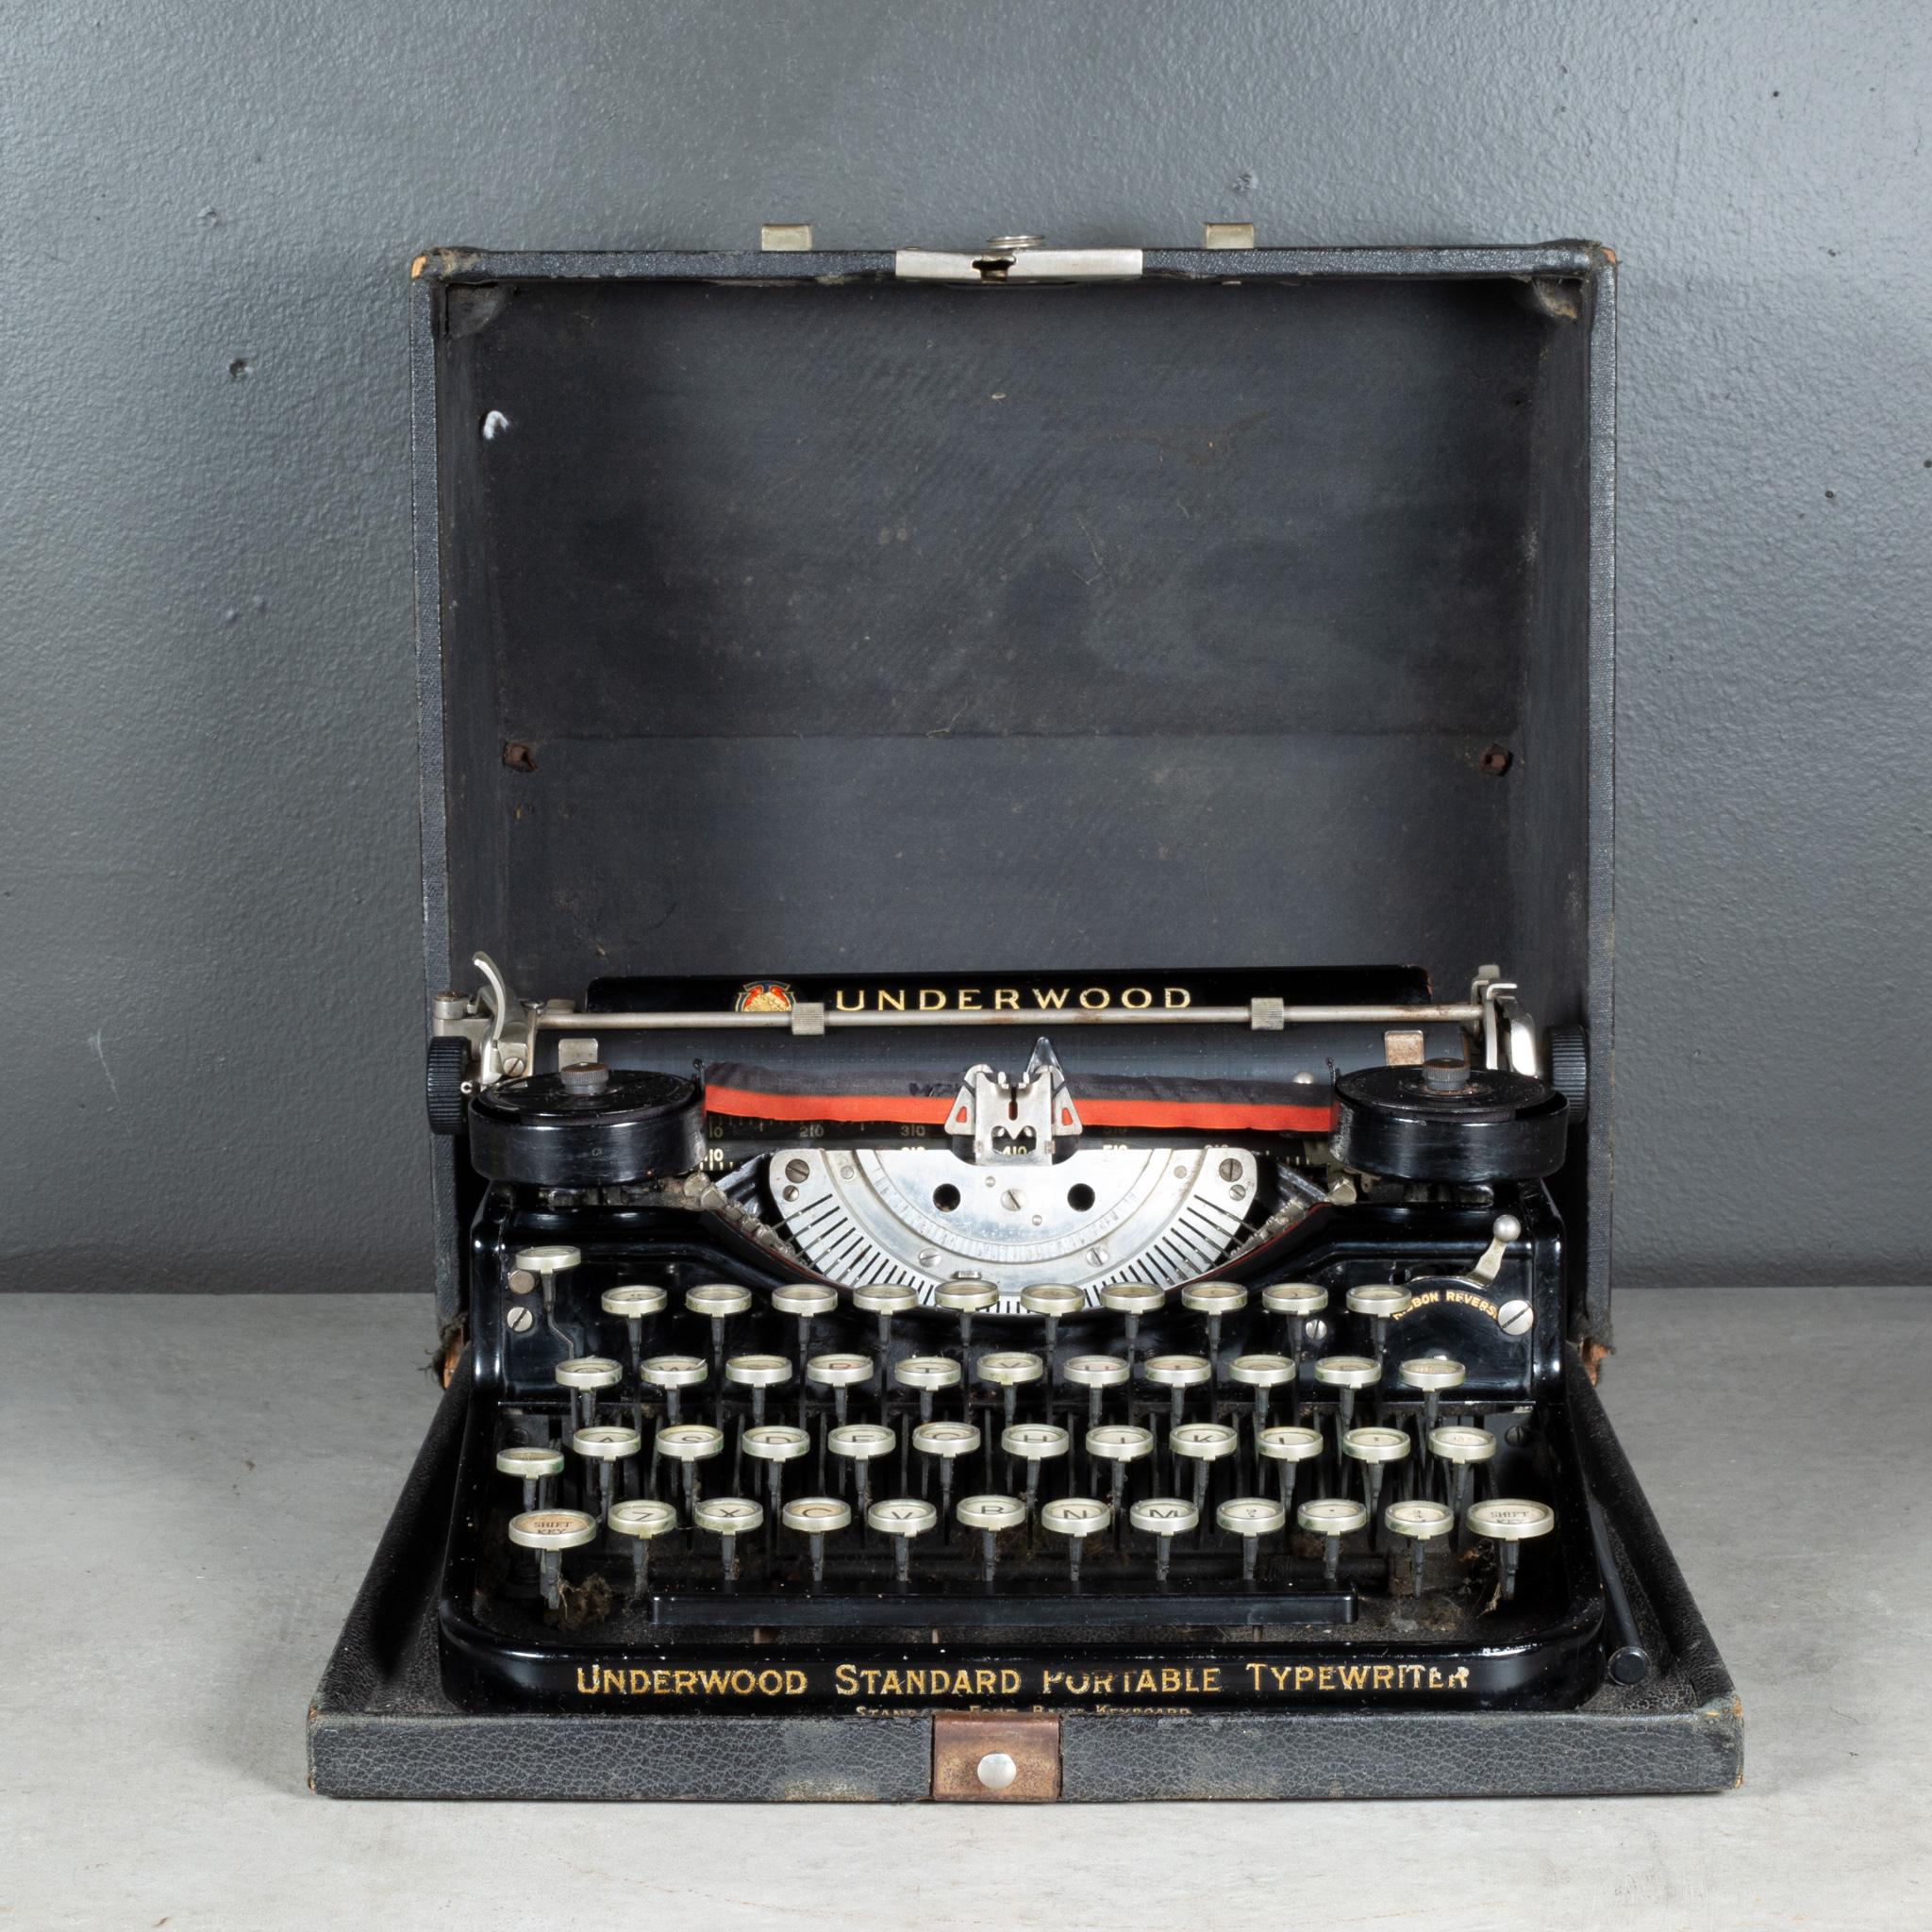 ABOUT

An Underwood standard four bank portable typewriter in high gloss black finish. Nickel keys with black and white lettering. Original gold Underwood lettering. Serial #4B139064.

    CREATOR Underwood Typewriter Co.
    DATE OF MANUFACTURE